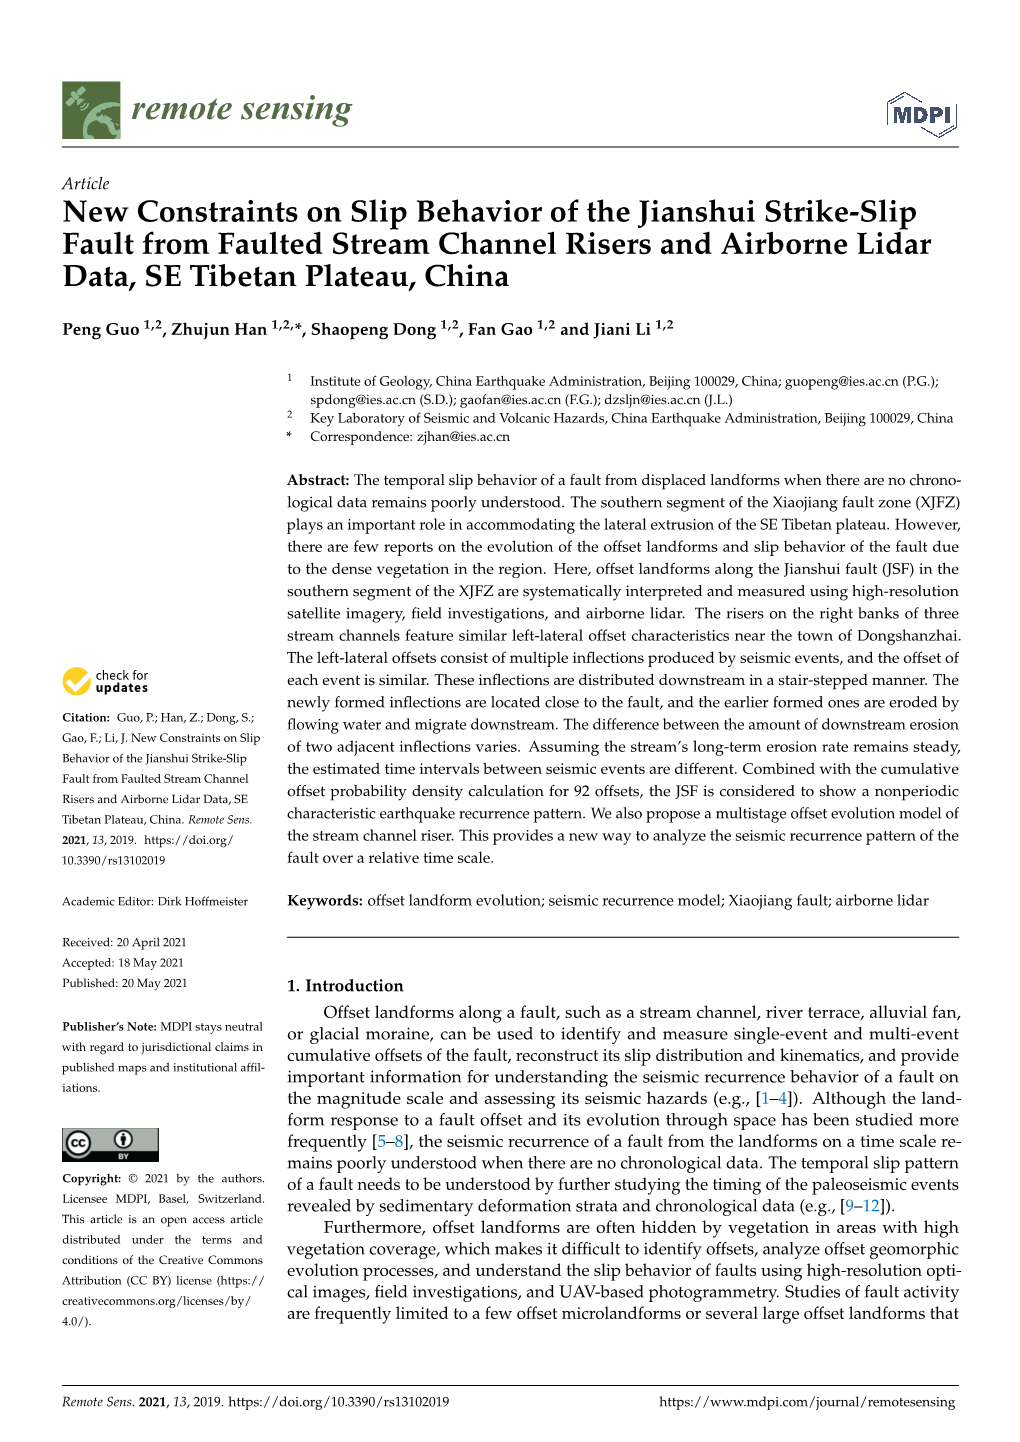 New Constraints on Slip Behavior of the Jianshui Strike-Slip Fault from Faulted Stream Channel Risers and Airborne Lidar Data, SE Tibetan Plateau, China